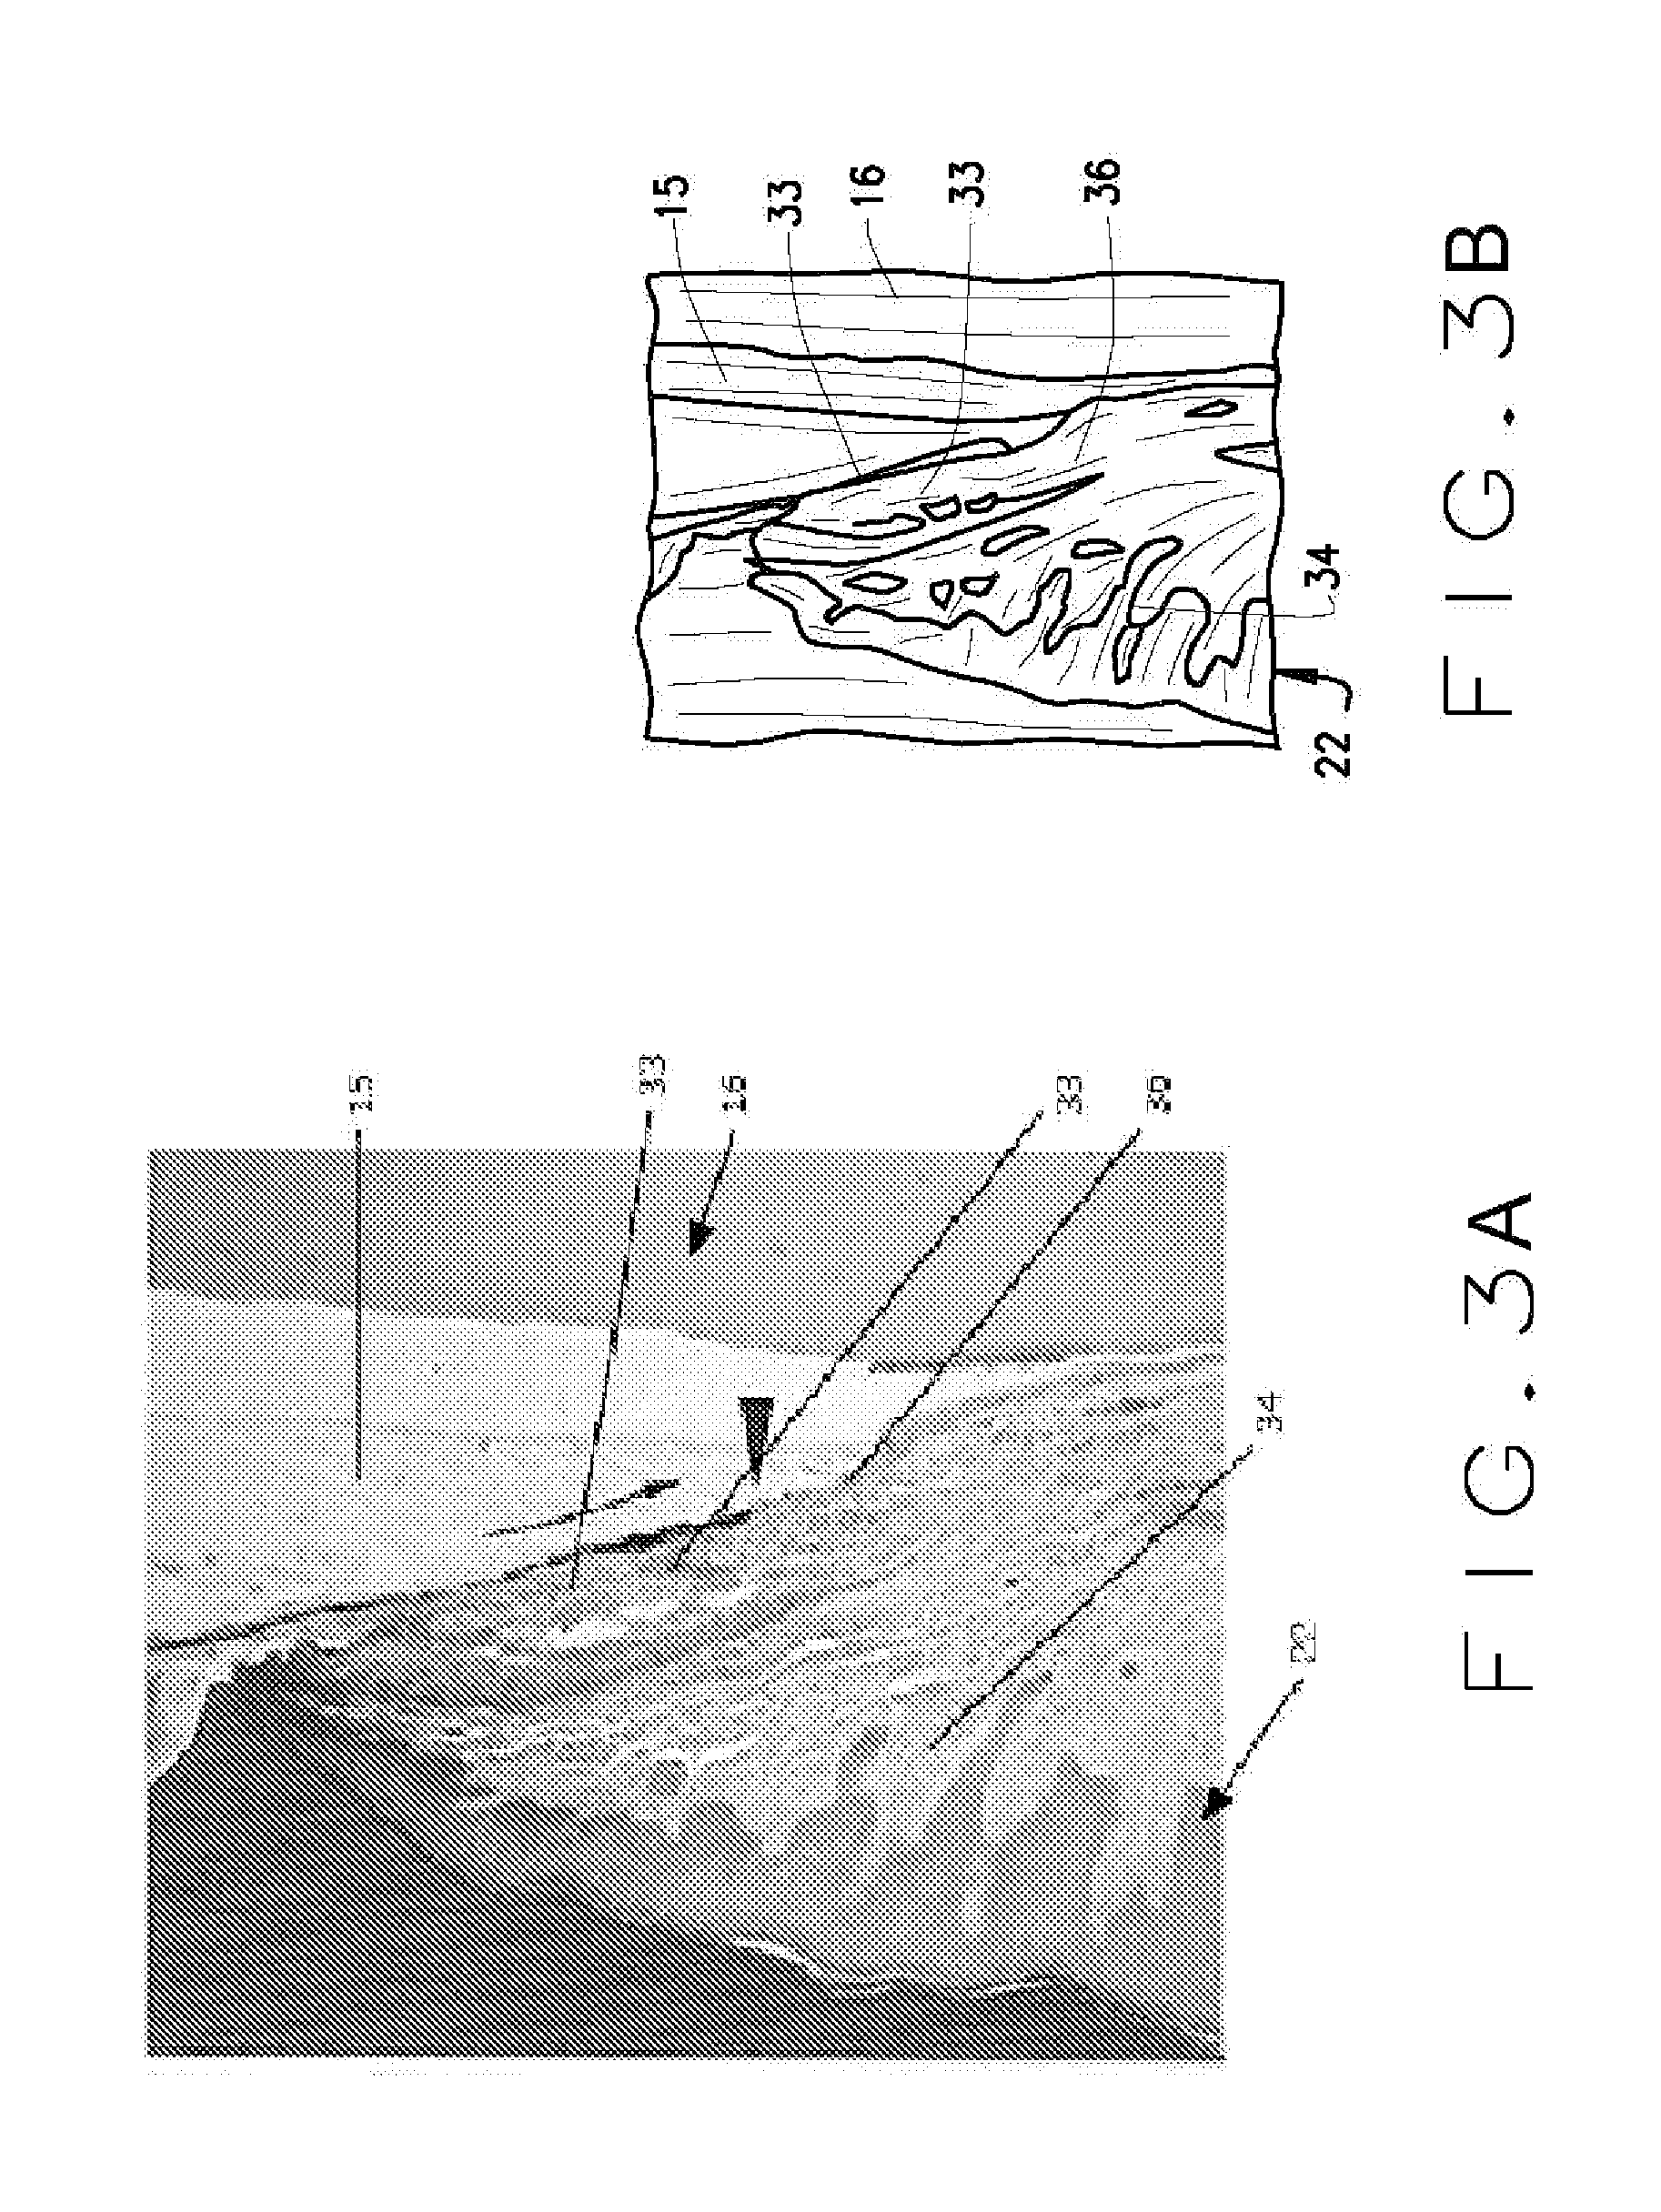 Article and method of initiating bone regrowth and restoration of gum recession with localized subgingival delivery of medications